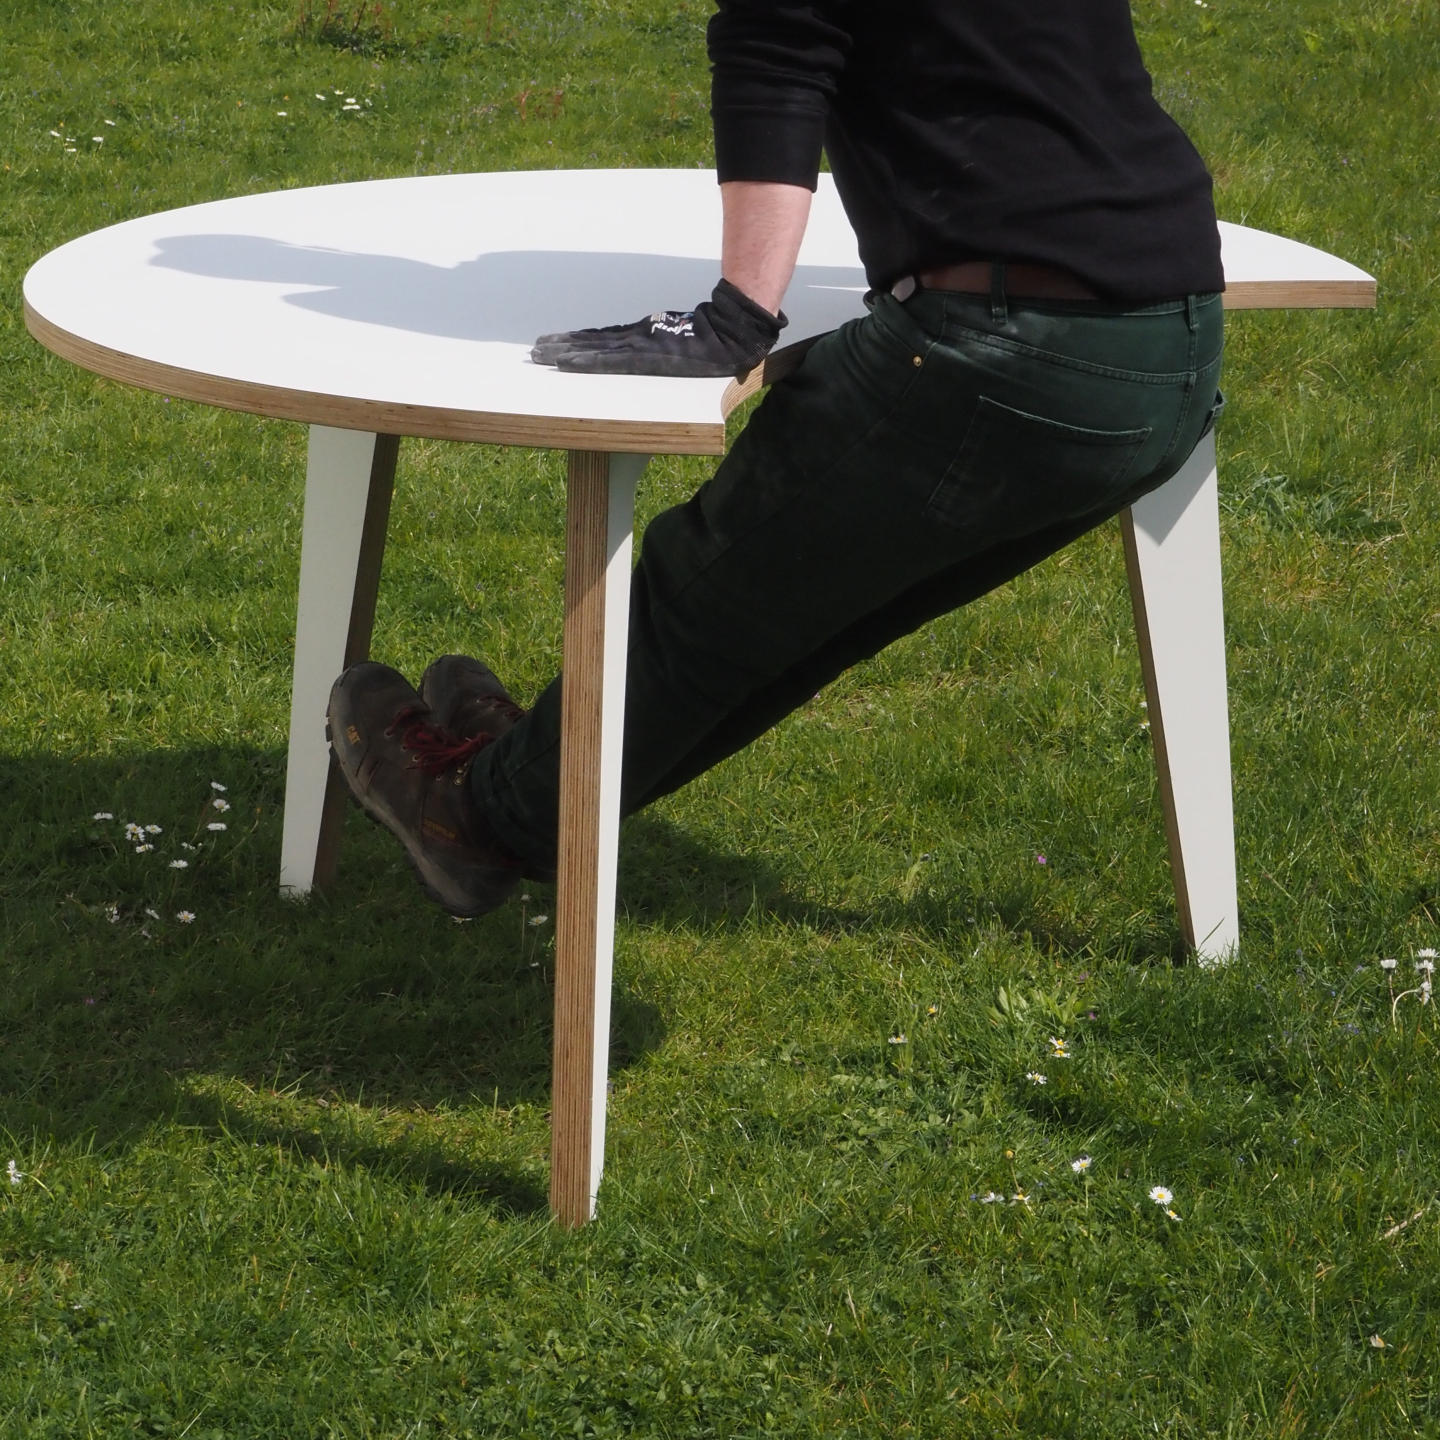 Table 'MKT' by Krum Studio in plywood with laminated top